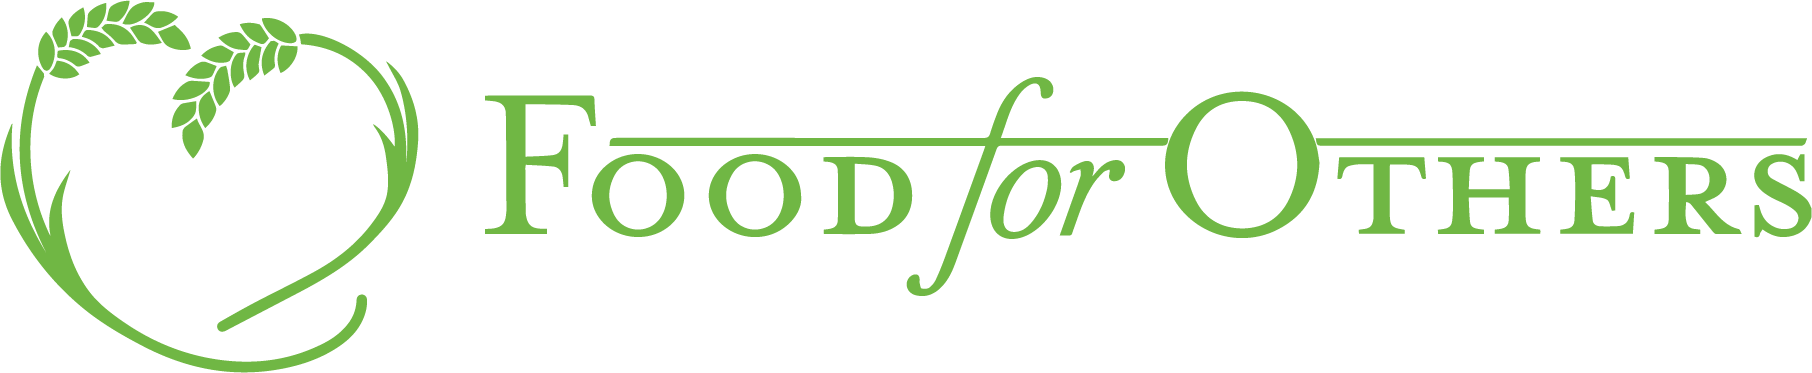 FOOD FOR OTHERS INC                                                    logo